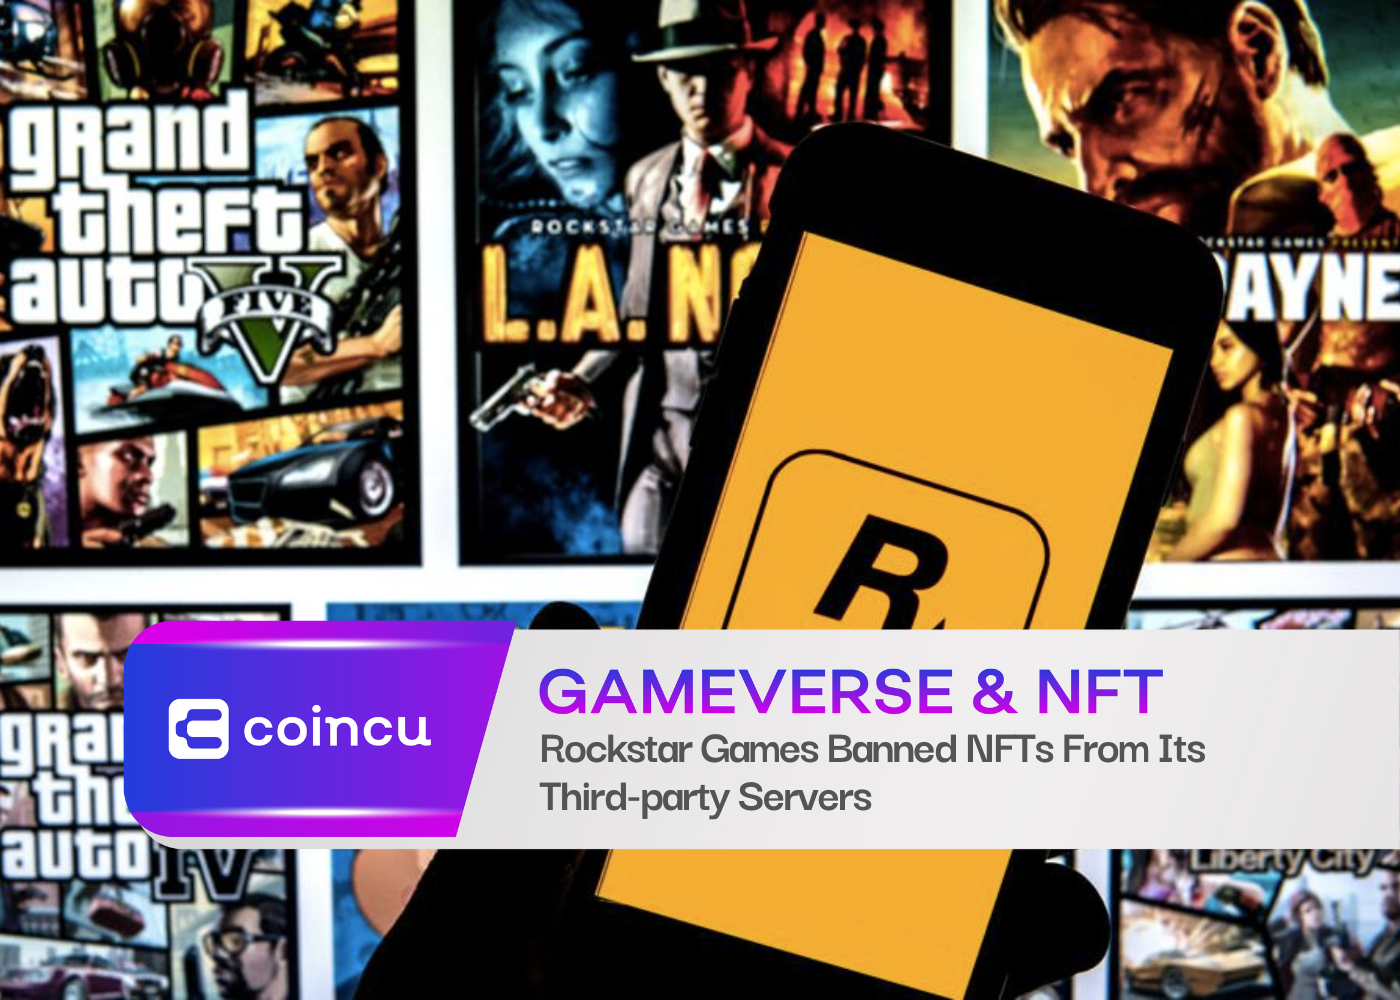 Rockstar Games Banned NFTs From Its Third-party Servers